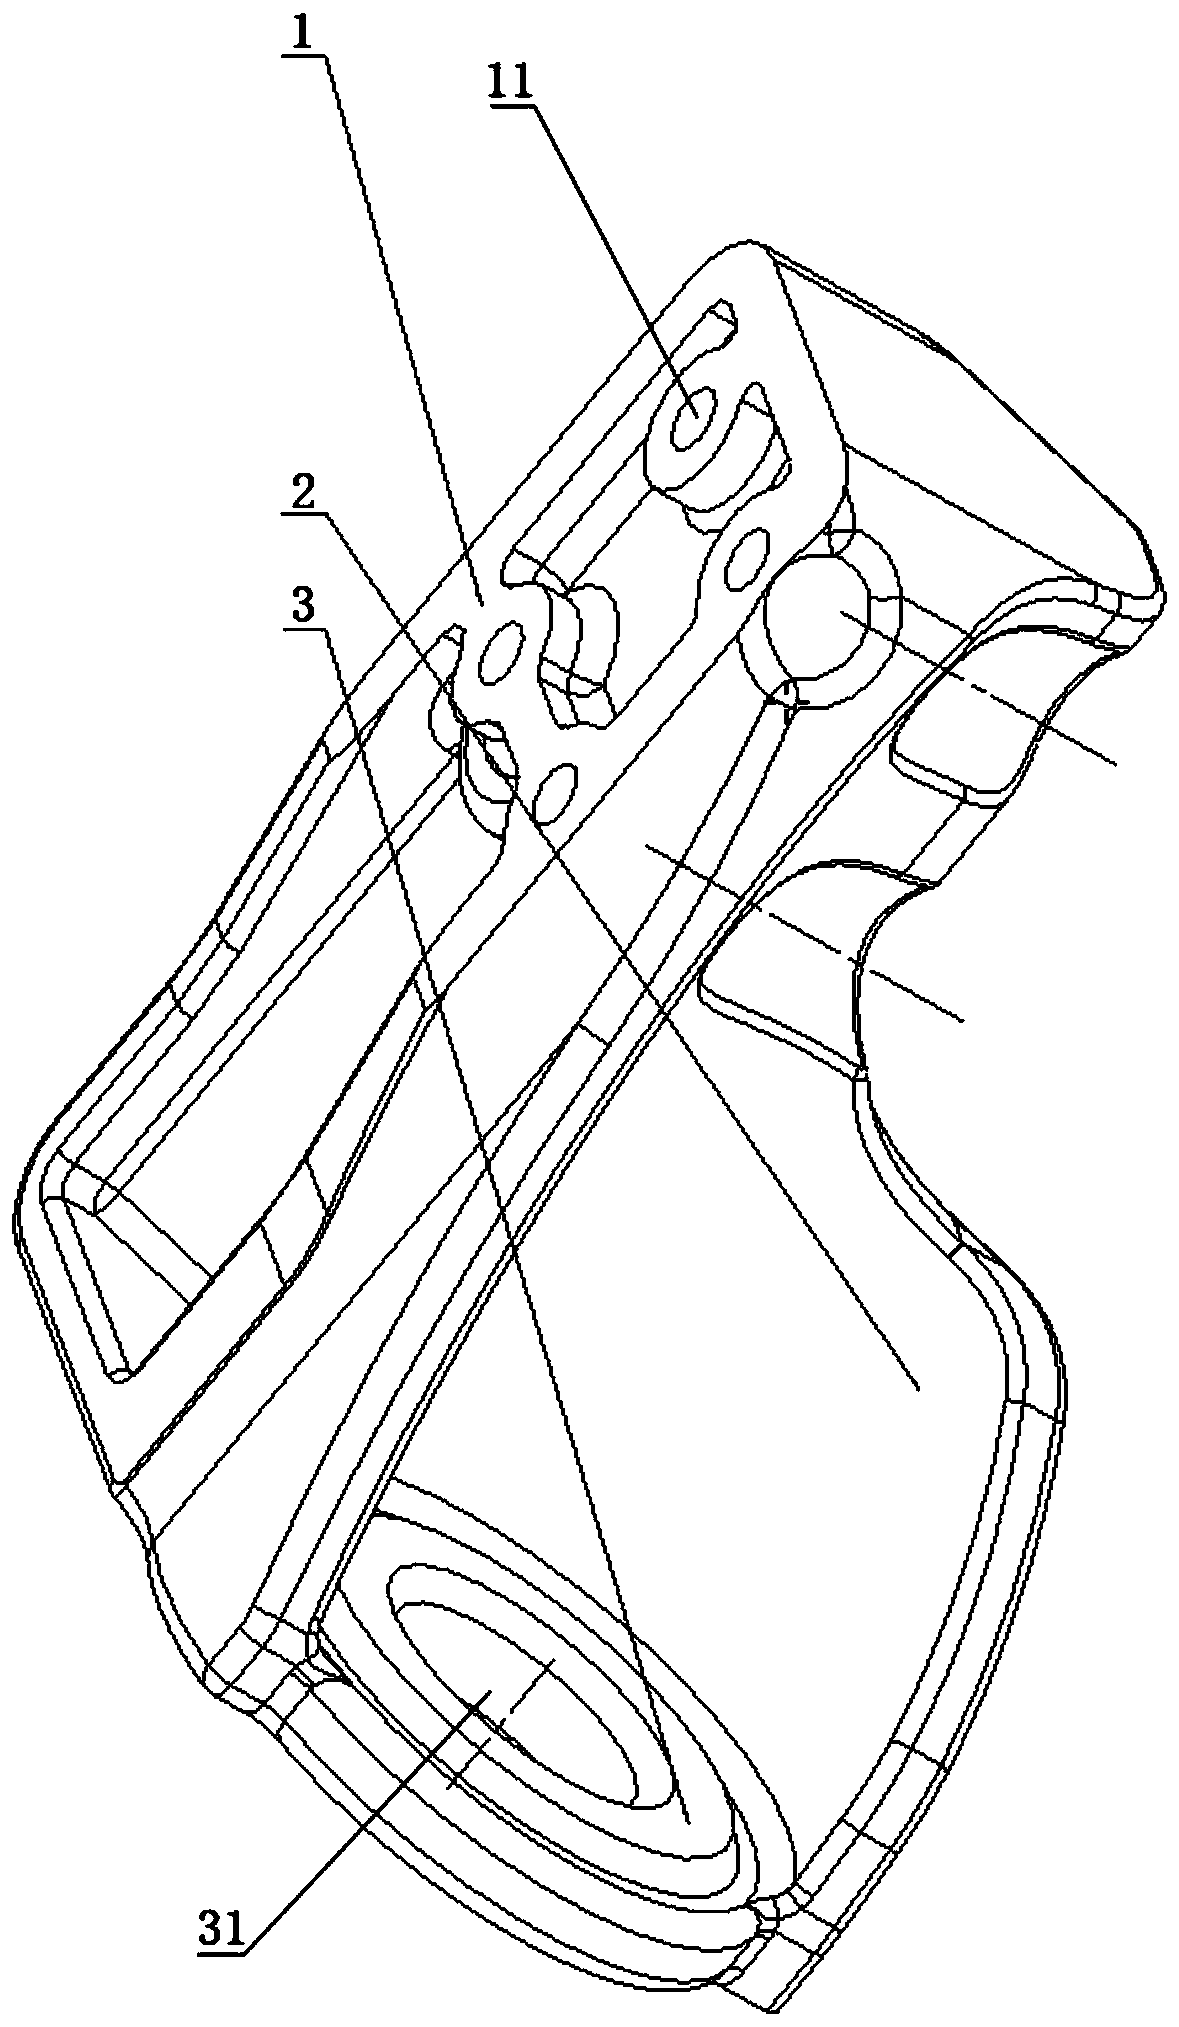 Engine mount structure of engine